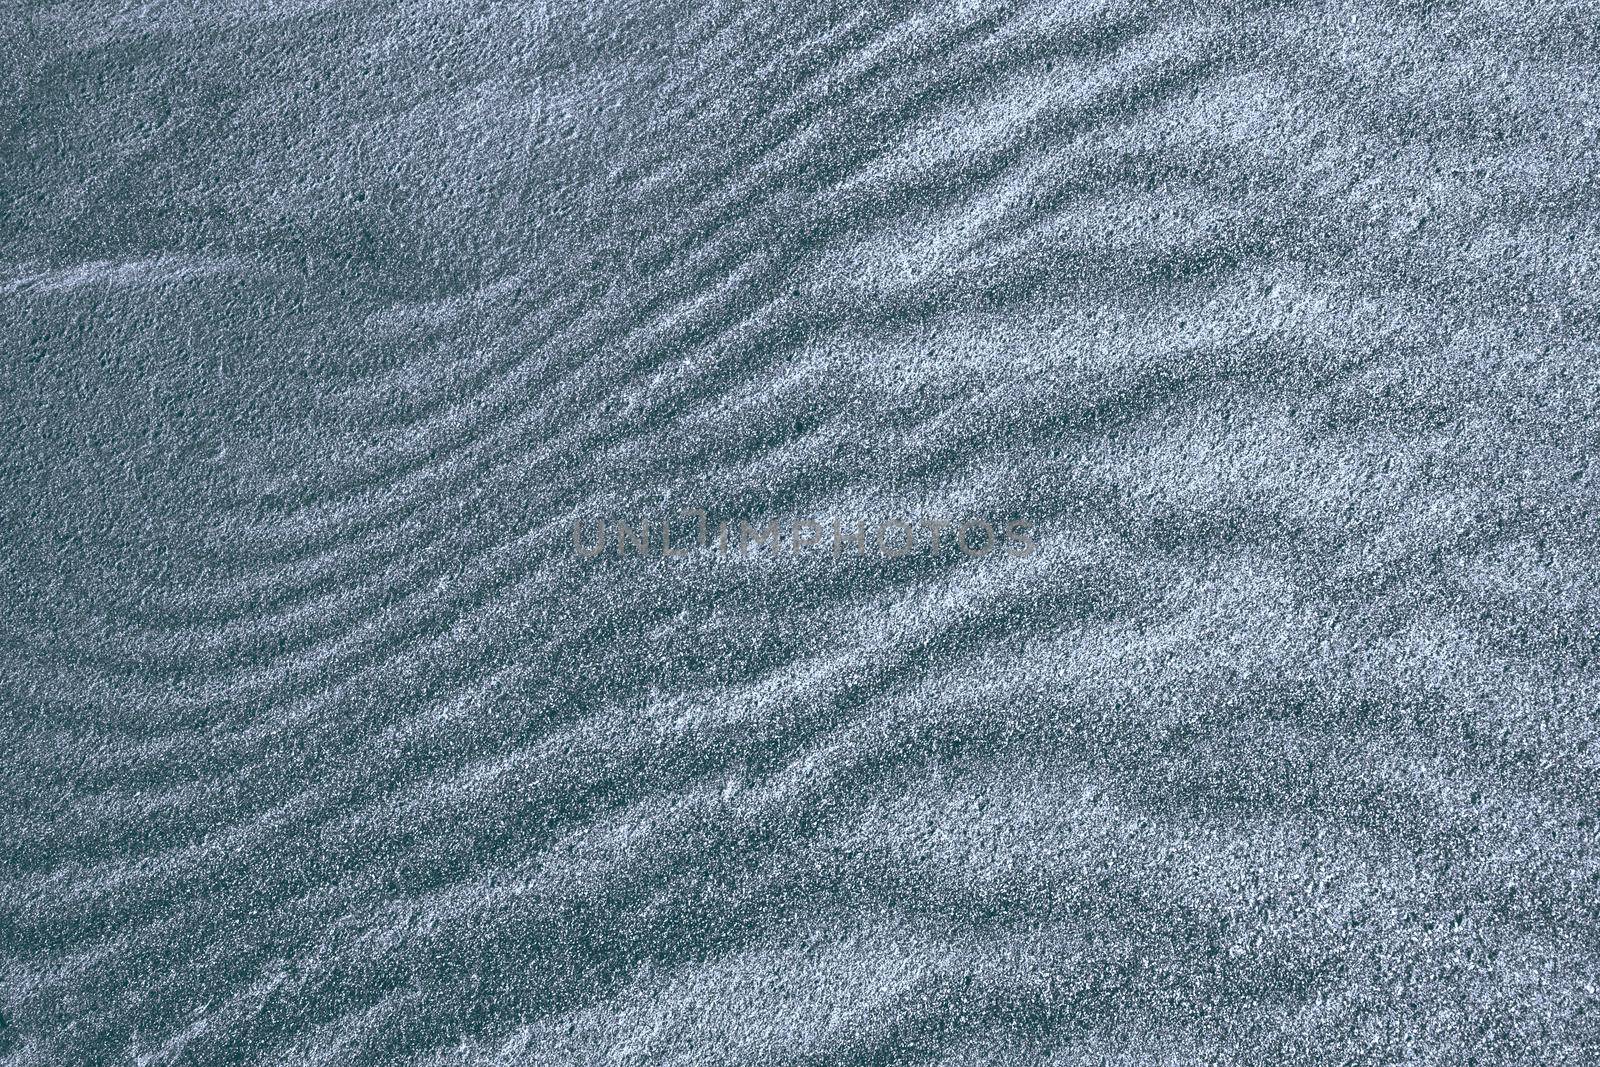 Background, texture, wave pattern of oceanic sand on the beach, blue-gray by Proxima13